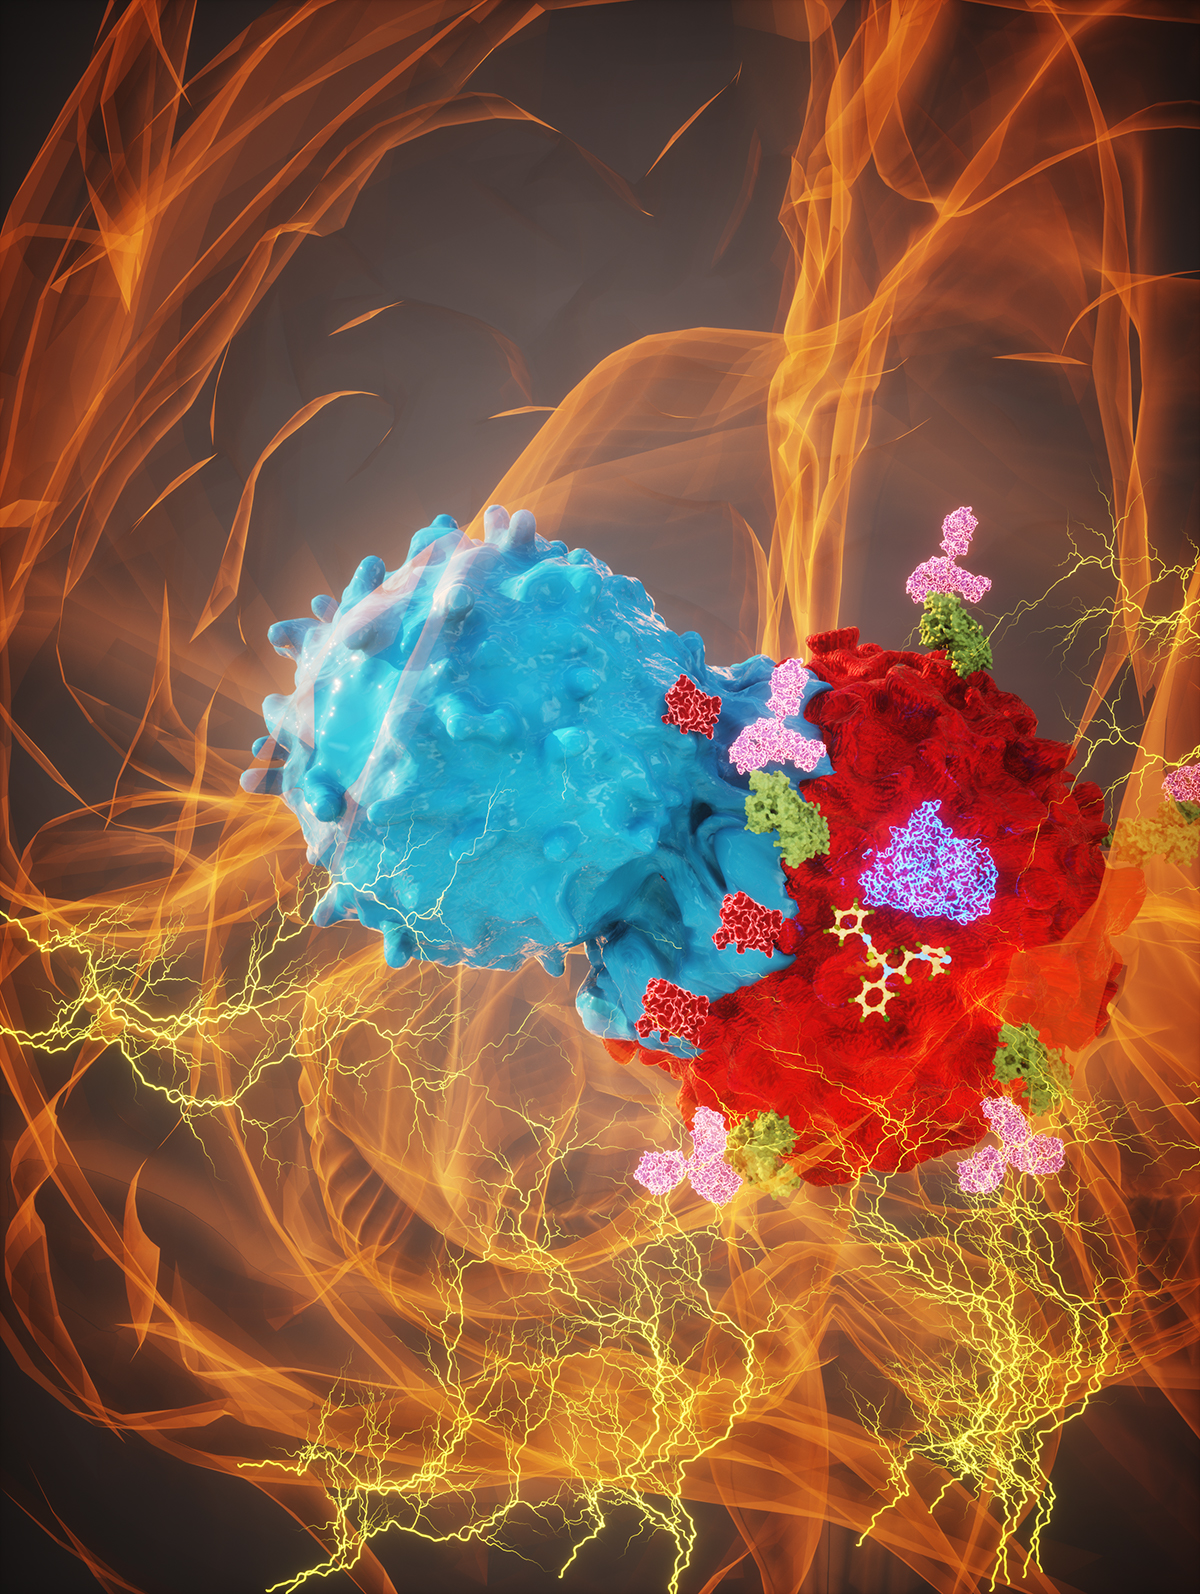 Artist’s rendering of a glioma cell under attack from the immune system.